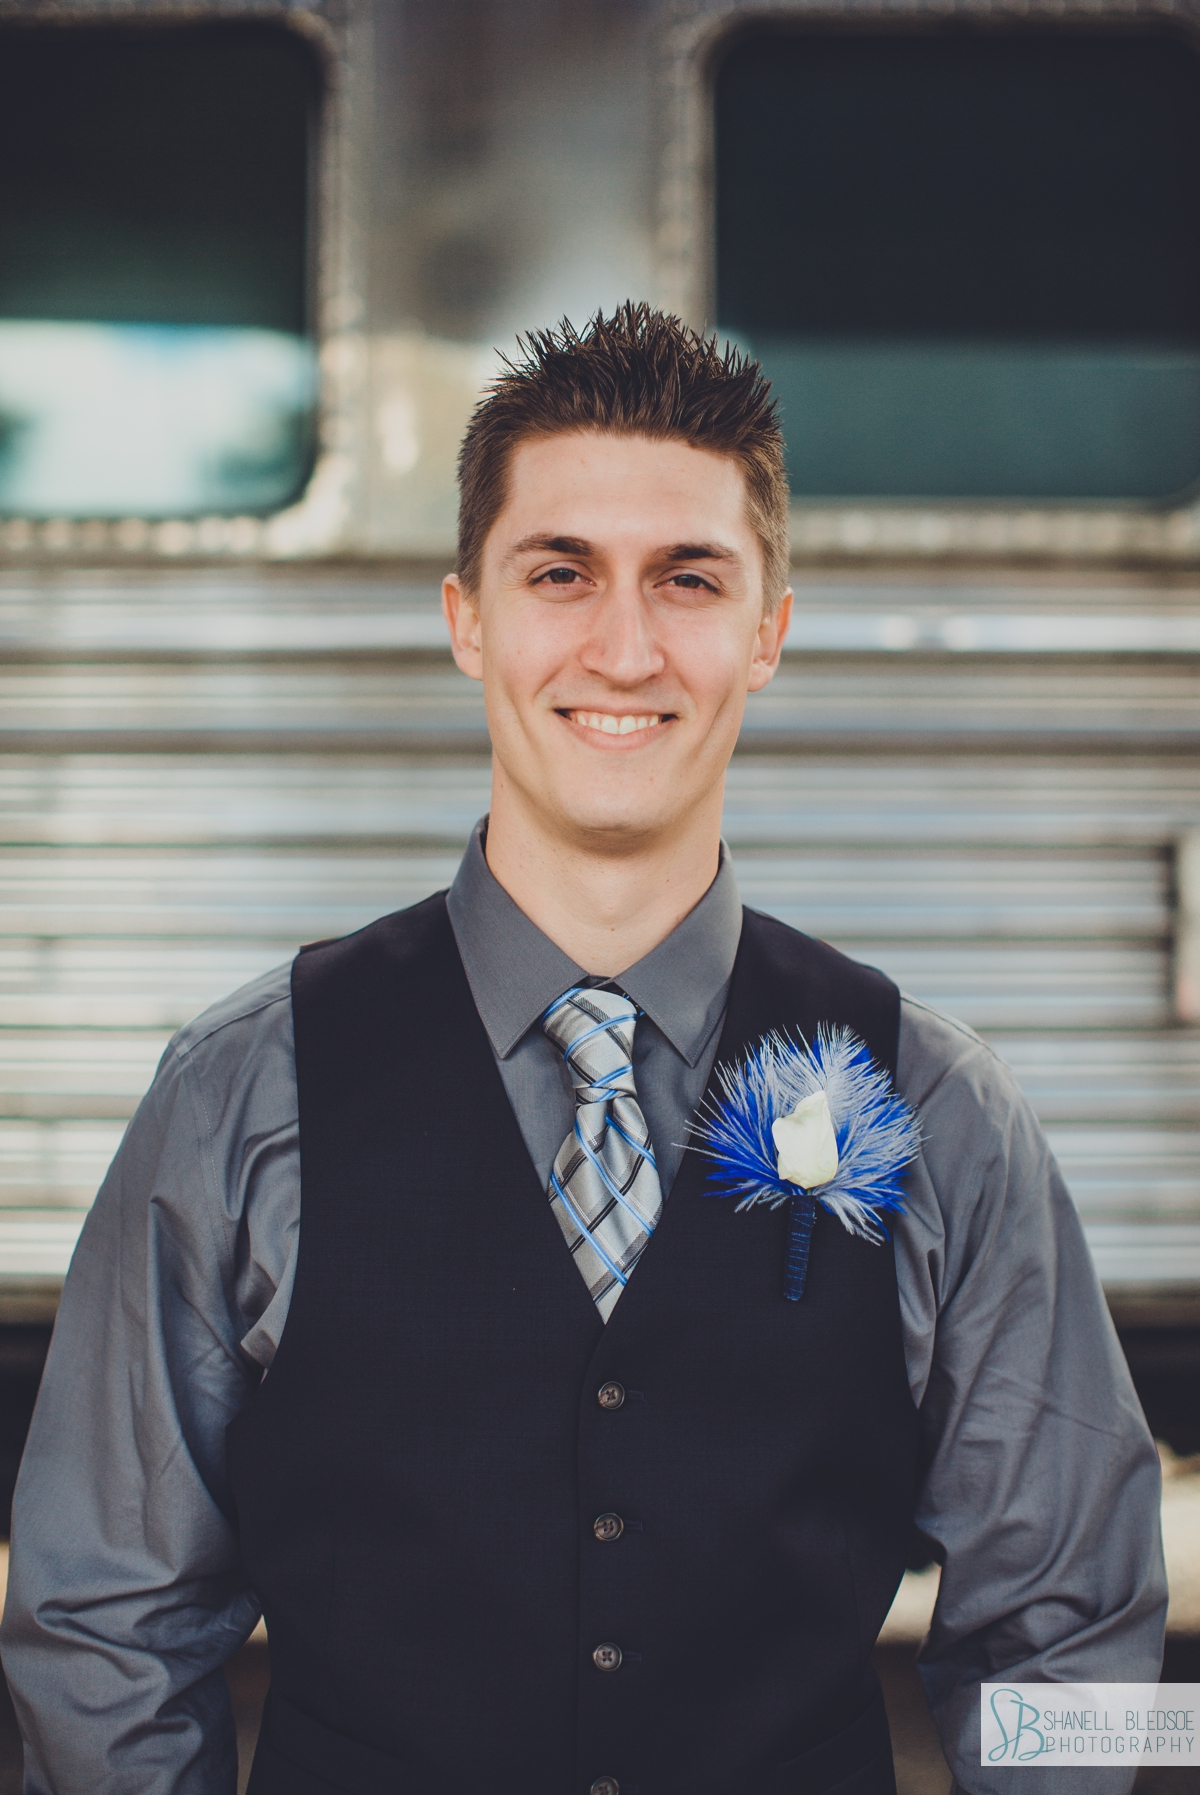 Groom portrait in front of train car at historic southern railway station in knoxville